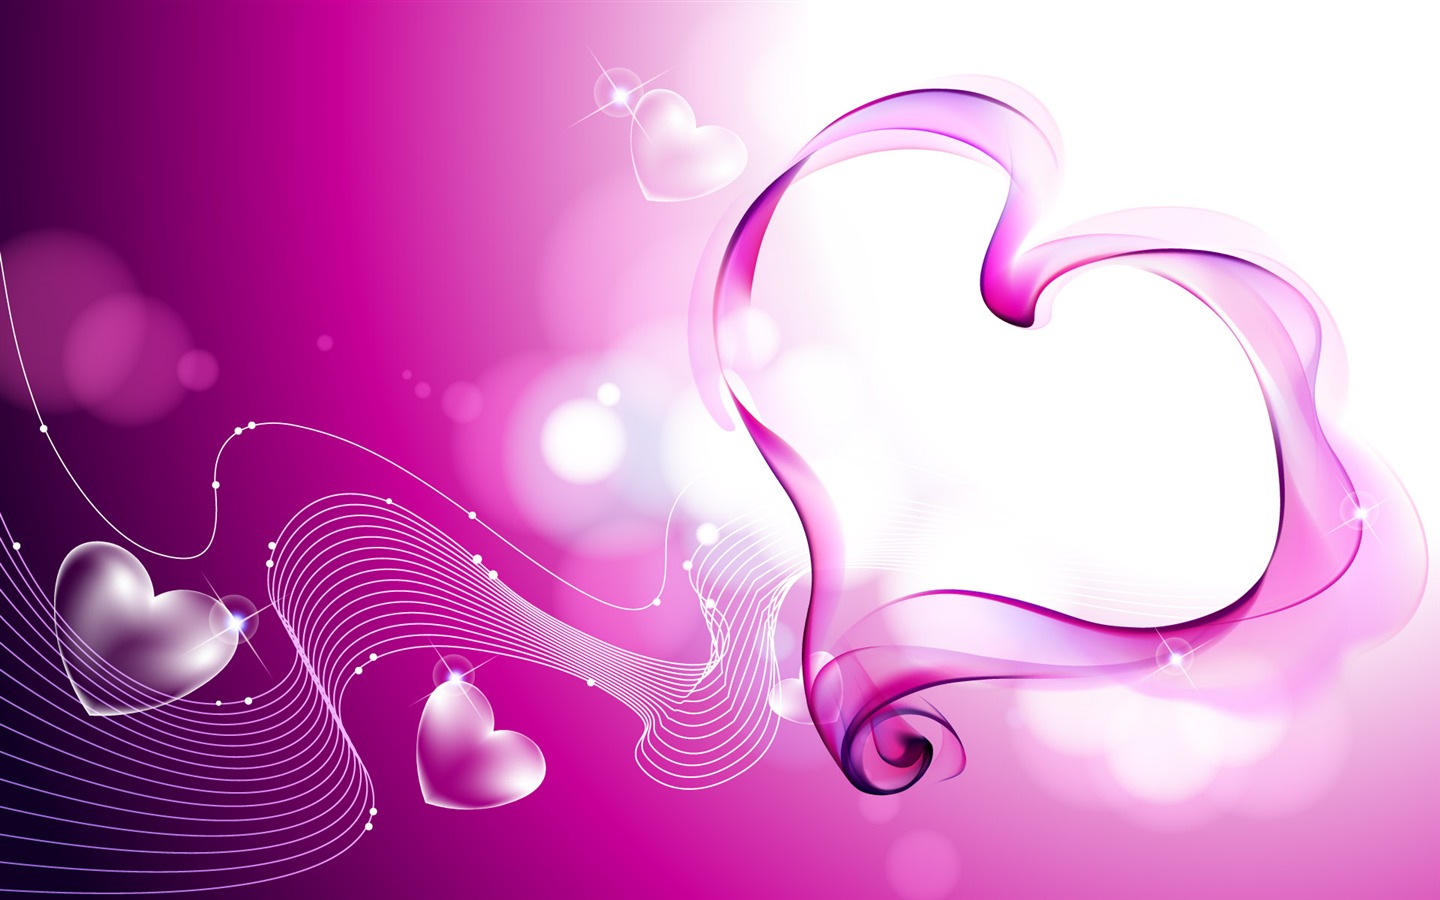 Valentine's Day Love Theme Wallpapers (3) #6 - 1440x900